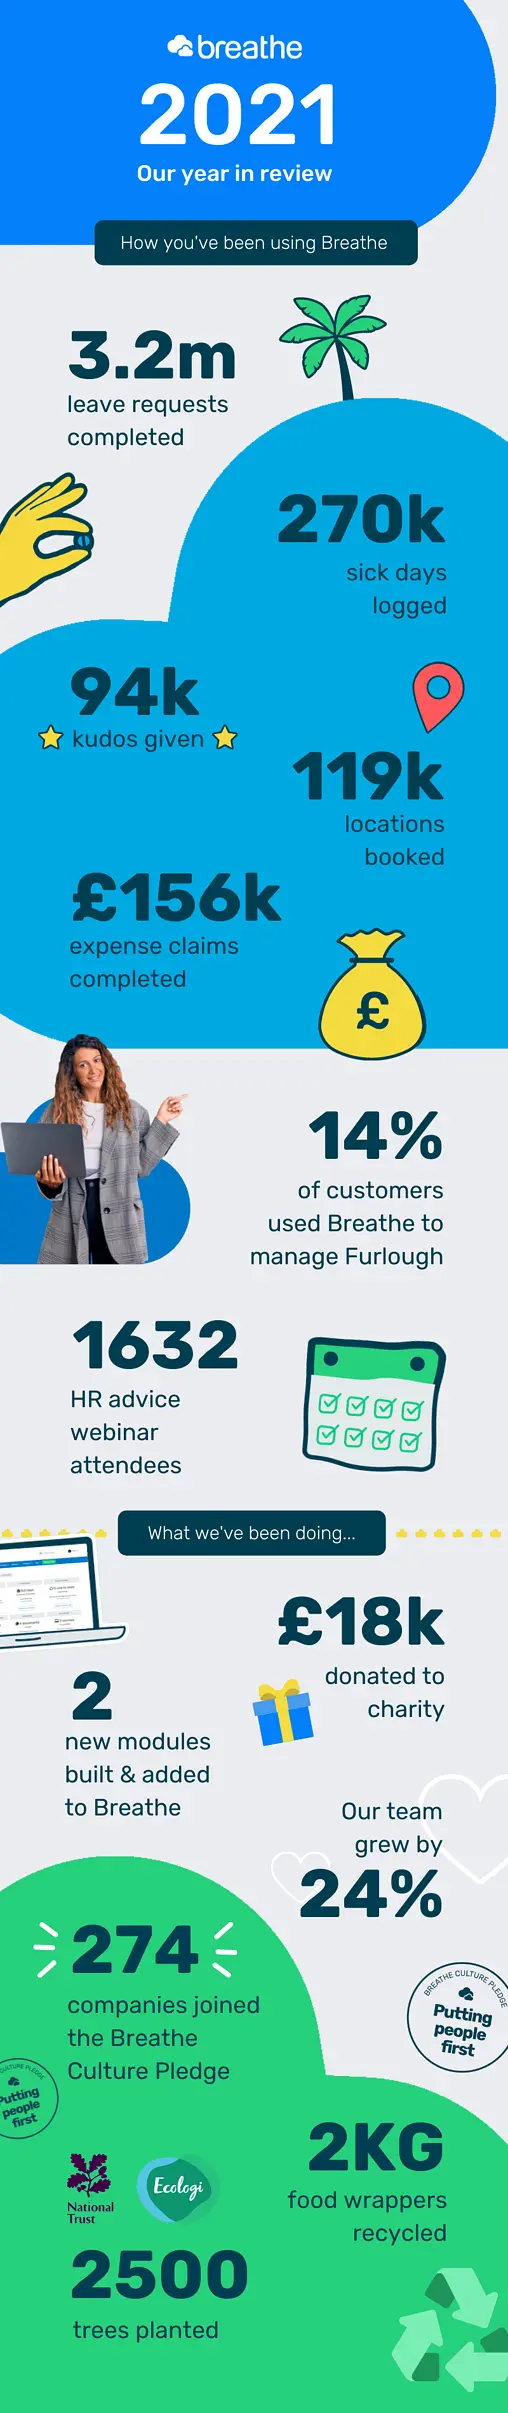 An infographic showing Breathe's year of 2021 in review. This infographic includes key statistics from the year such as how many leave requests were completed.